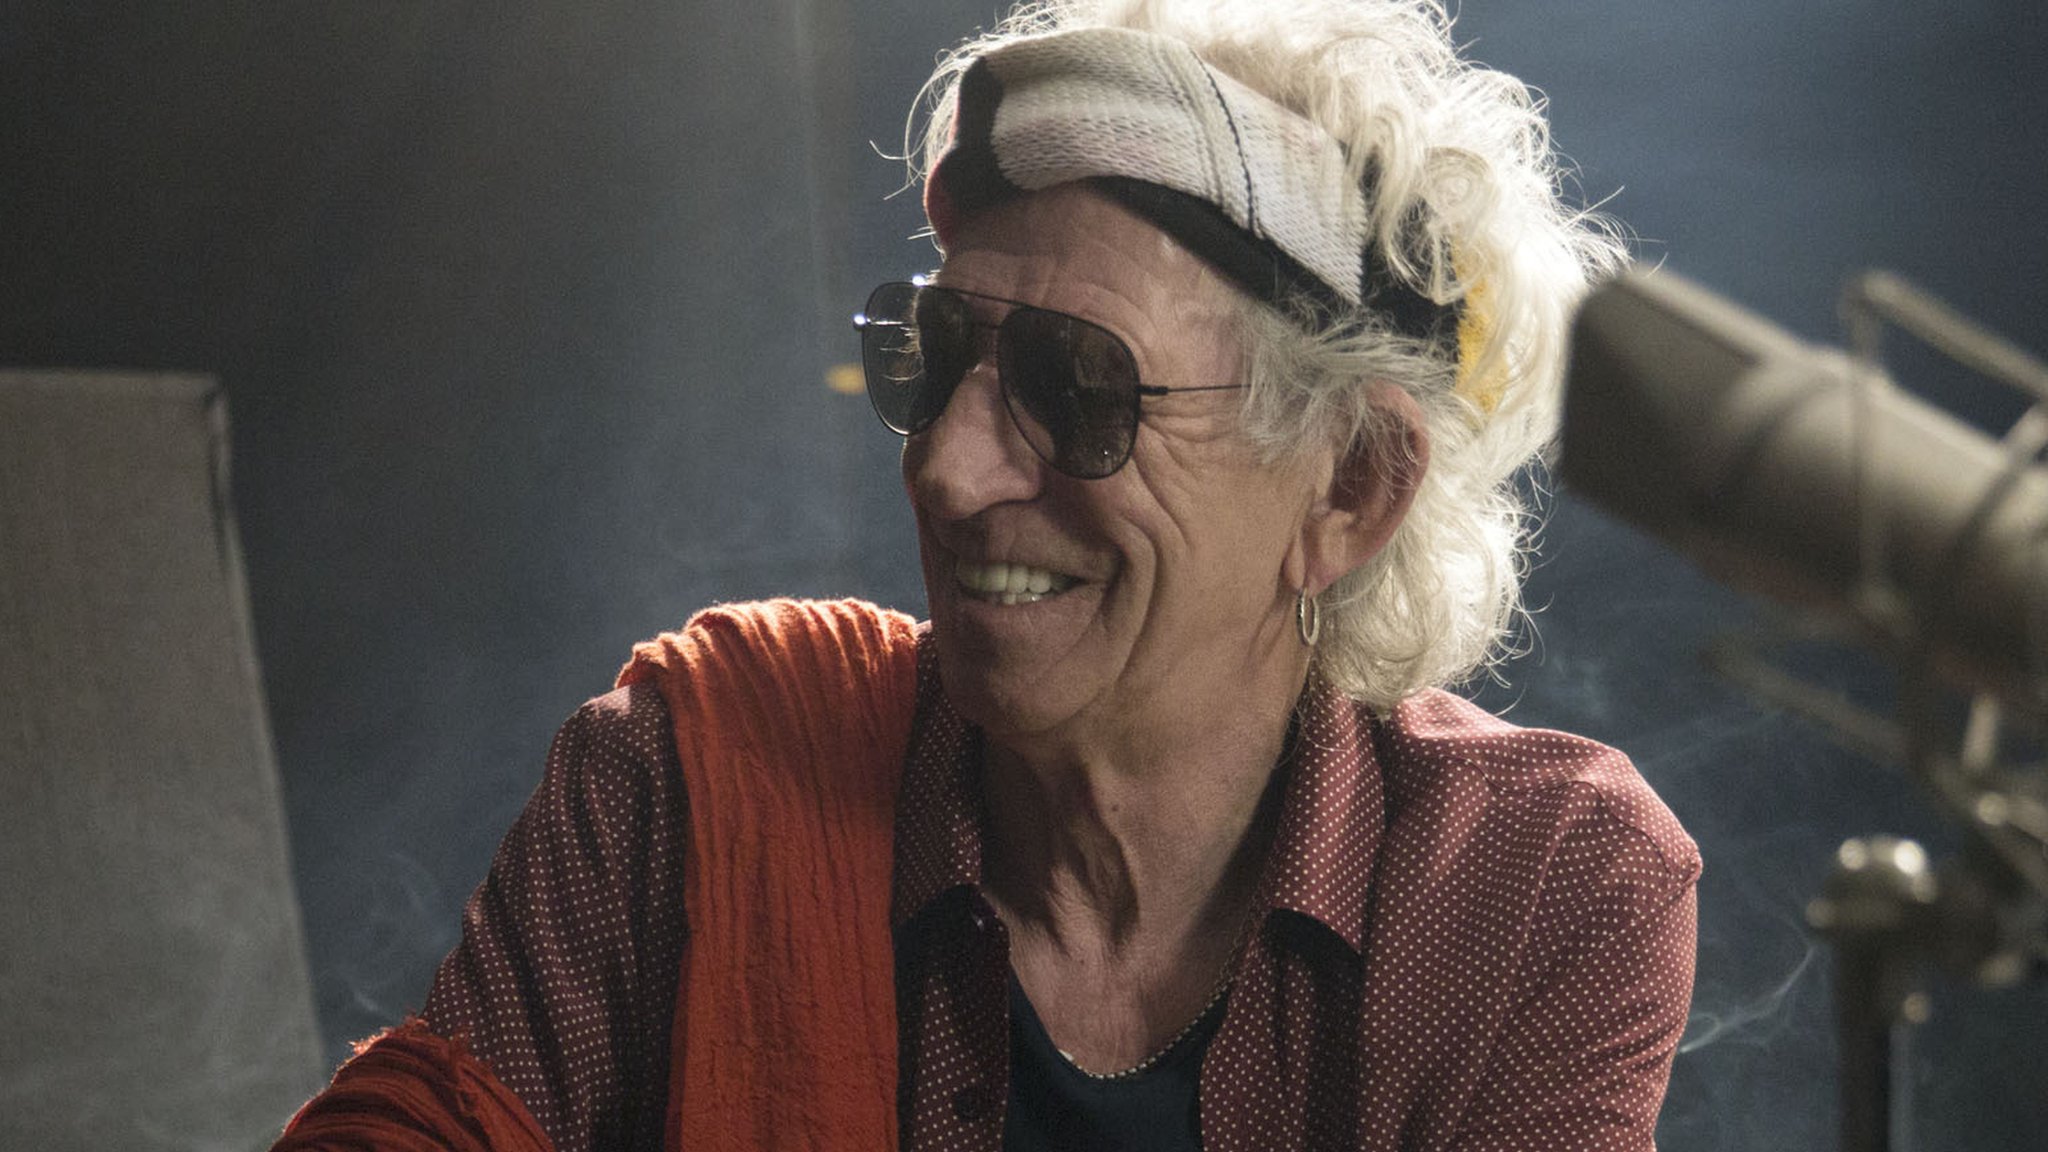 Keith Richards Press Room Induction Ceremony Stock Photo 181488956 |  Shutterstock